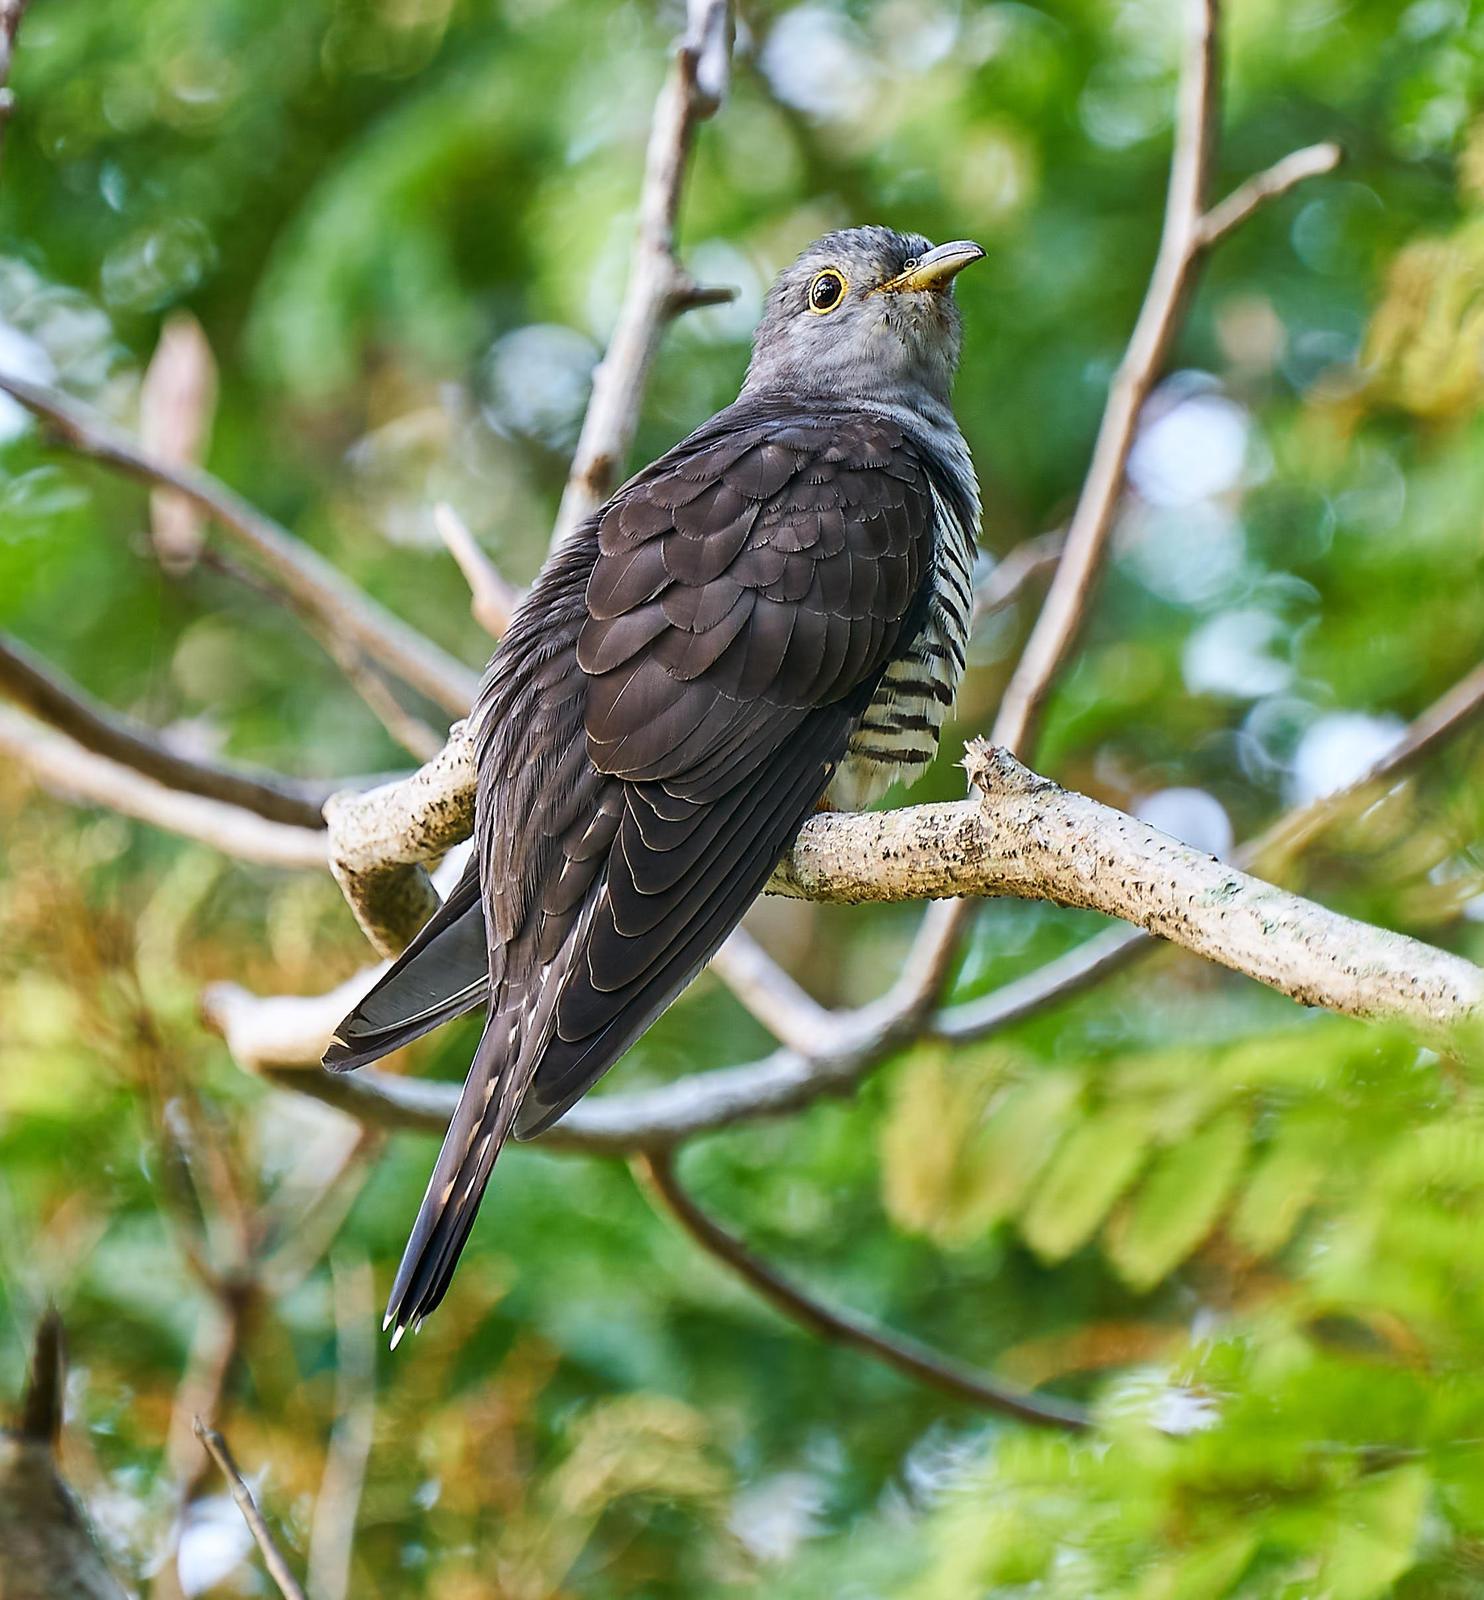 Indian Cuckoo Photo by Steven Cheong